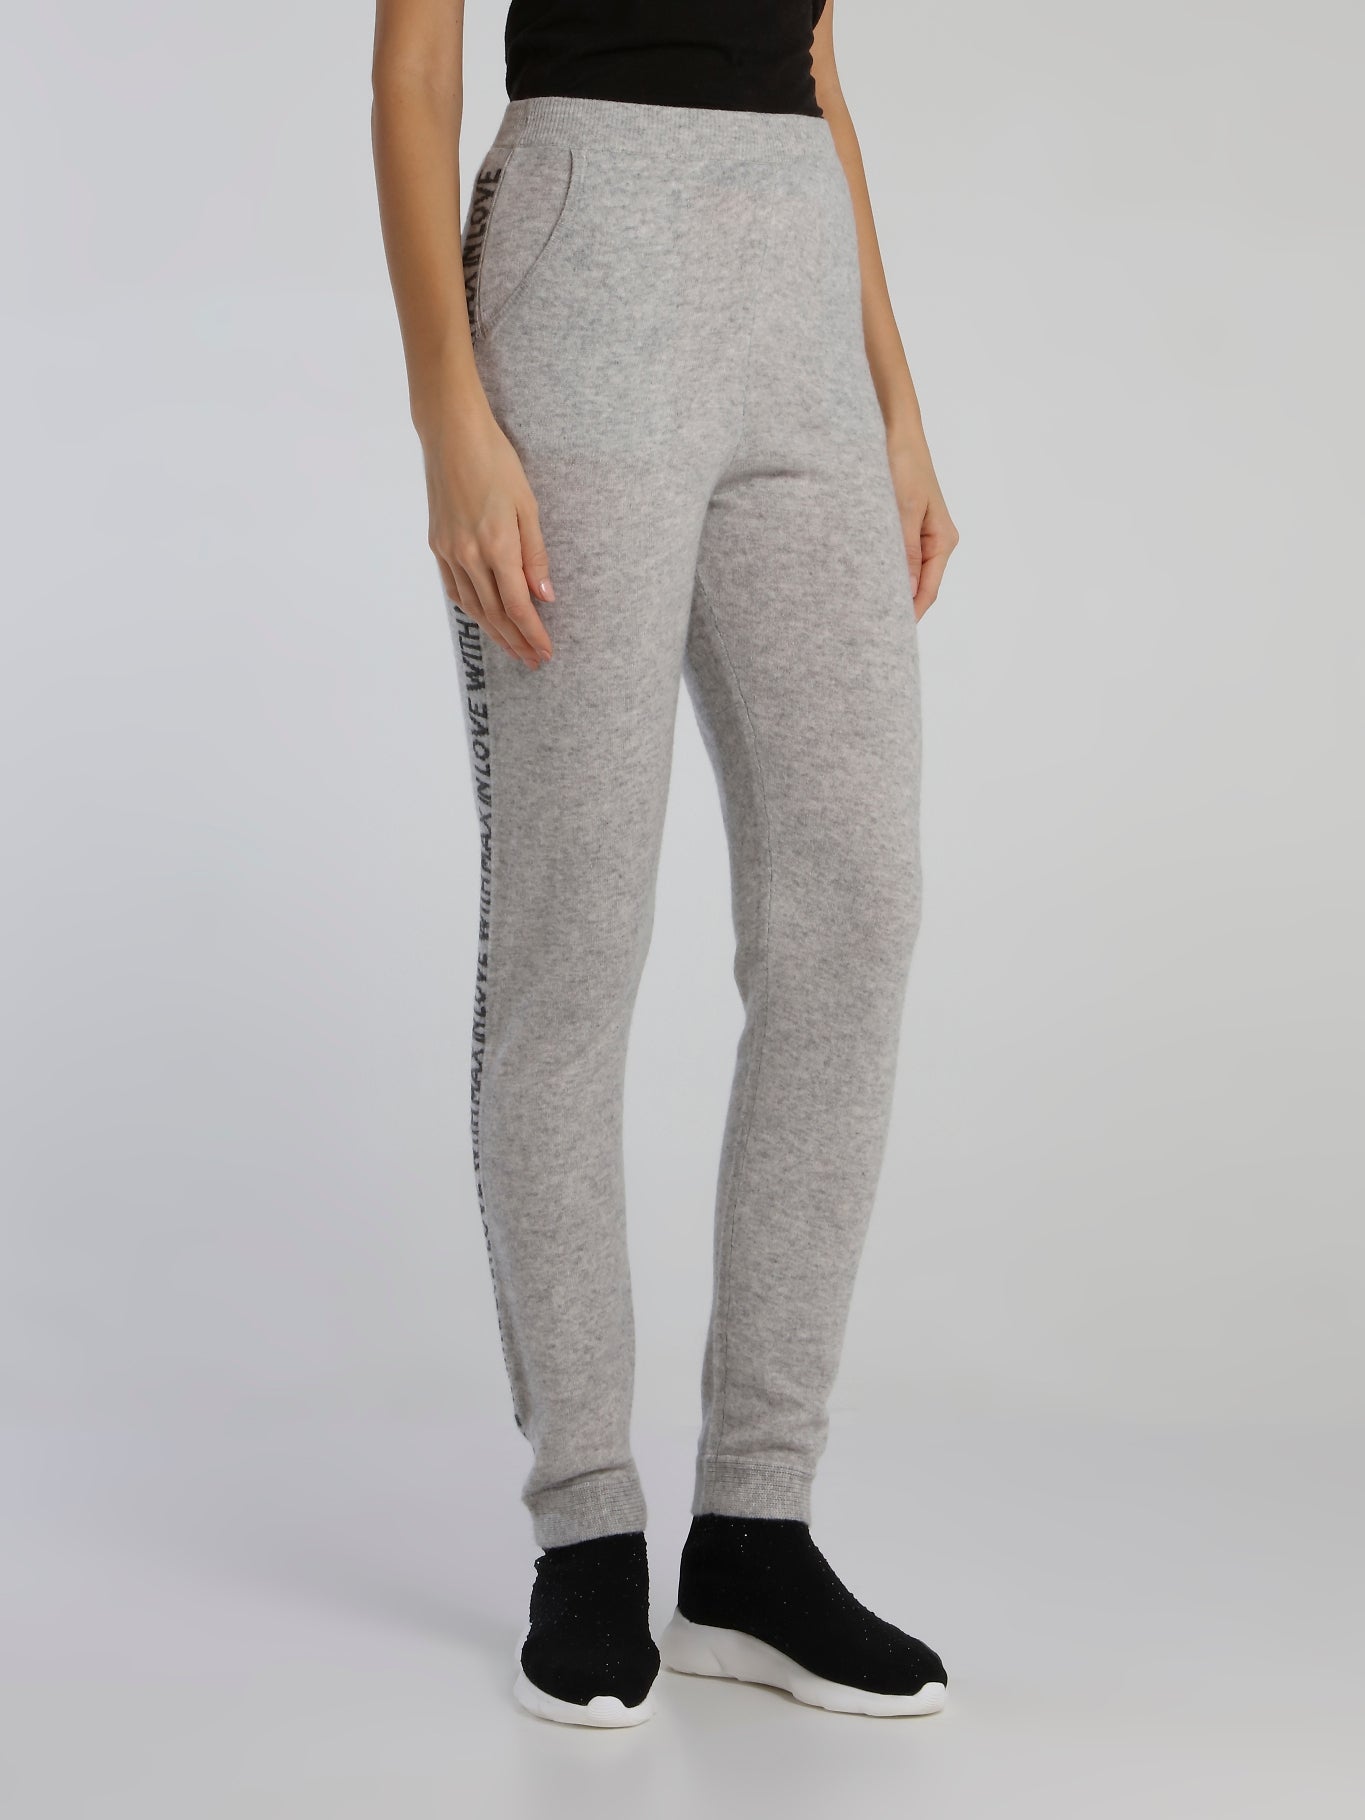 Jimi Grey Waistband Knitted Active Pants